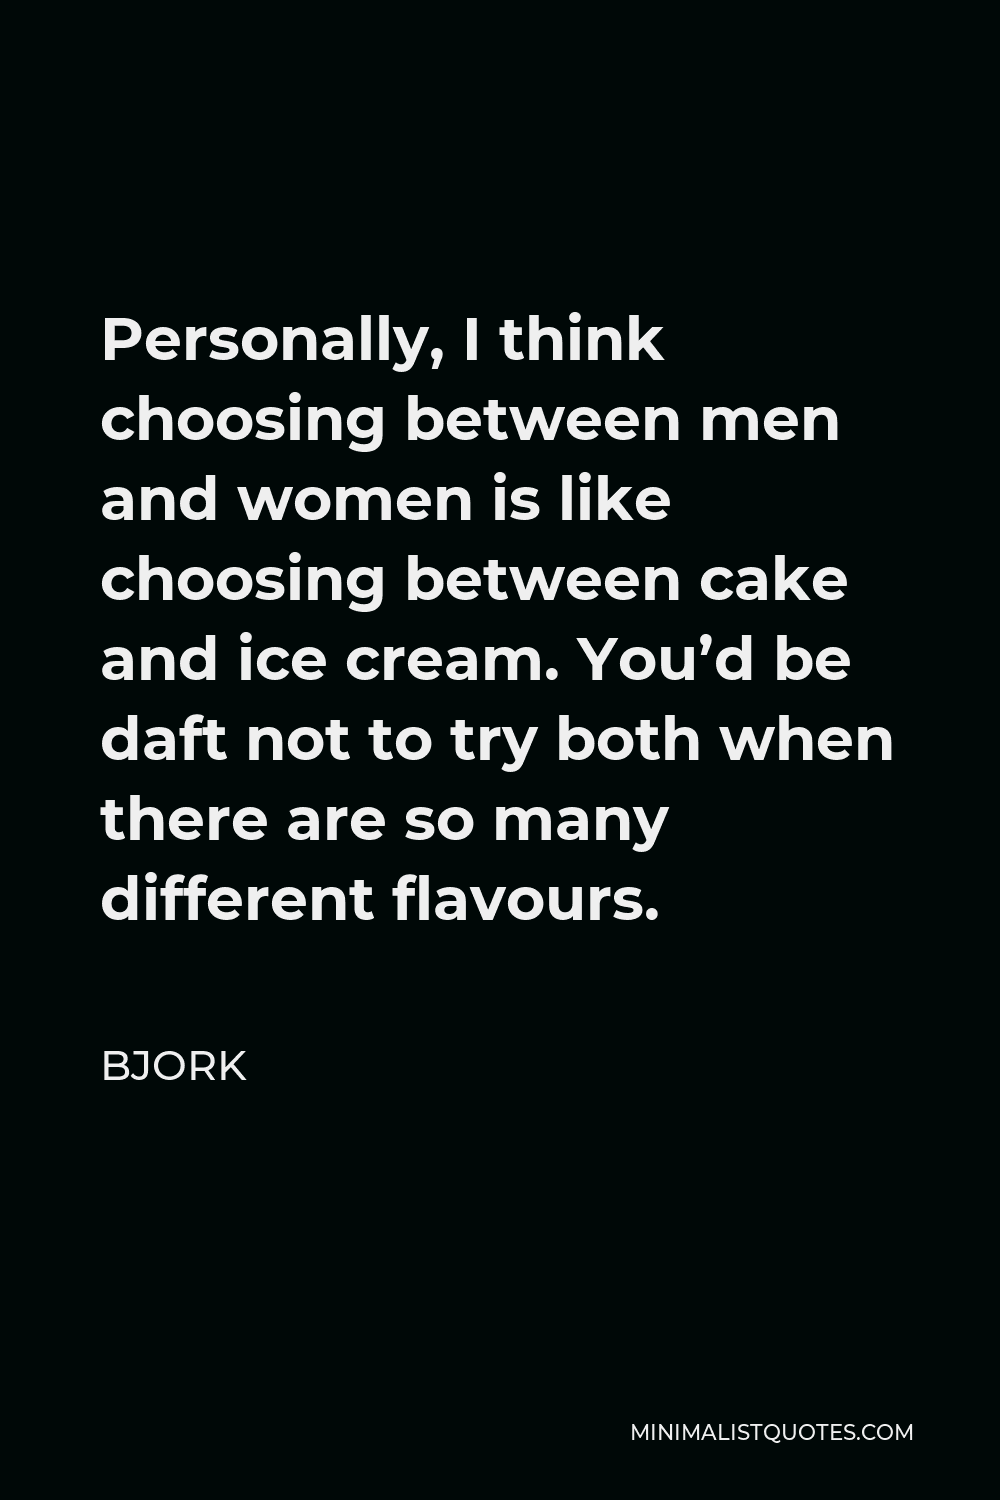 Bjork Quote - Personally, I think choosing between men and women is like choosing between cake and ice cream. You’d be daft not to try both when there are so many different flavours.